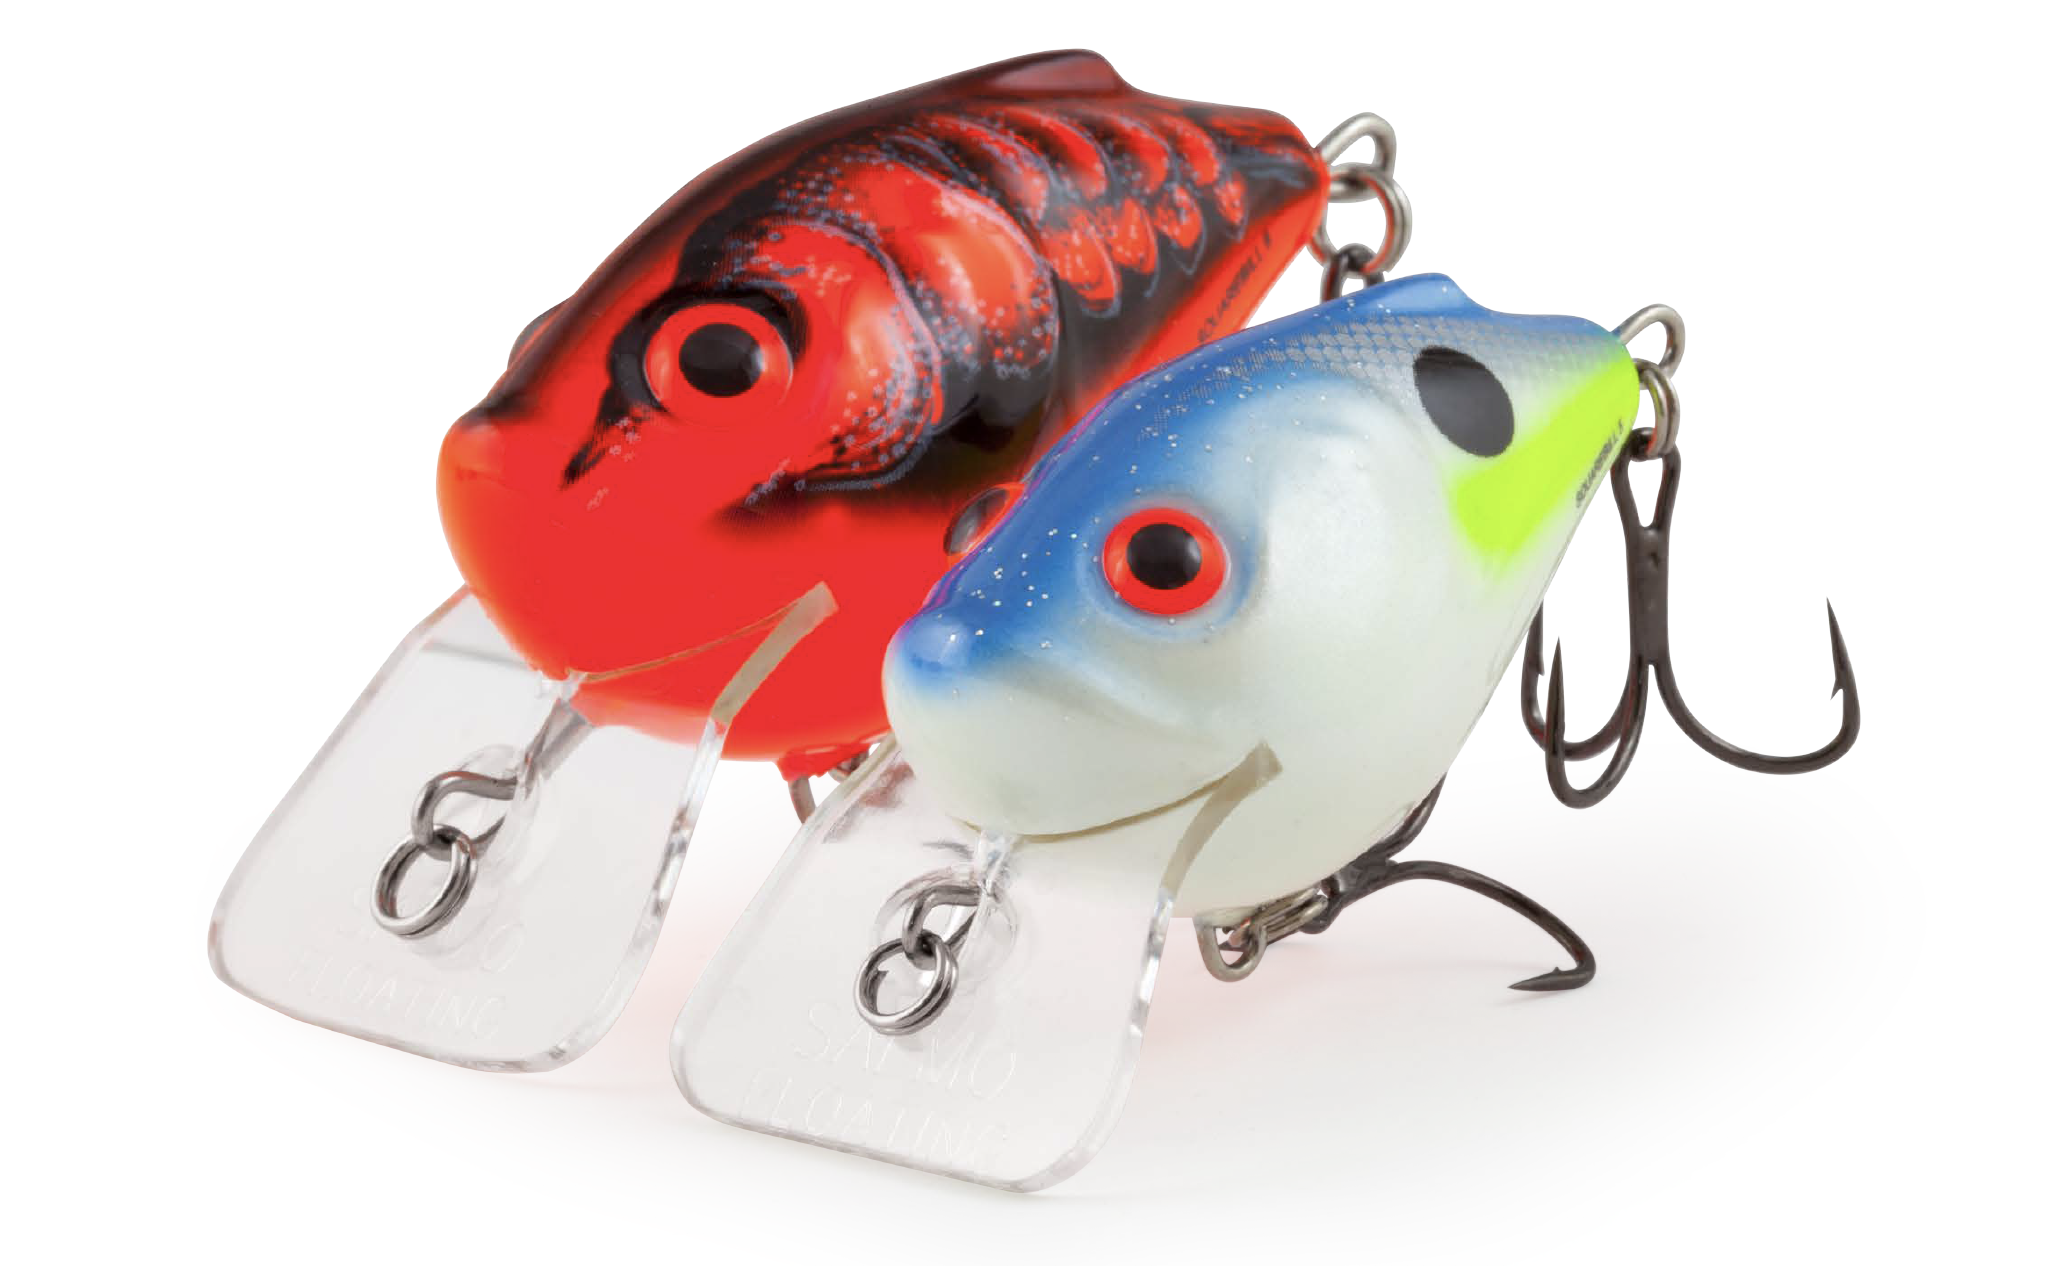 Squarebill<br>	
Salmo	<br>
Introducing the ultimate shallow running bass crankbait. The Salmo Squarebill is made of proprietary foam material, which is proven to have the same characteristics as balsa wood, but with far more durability. It features a welded through wire construction and polycarbonate lip, which takes the durability factor a step further. The unique square-shaped bill allows the bait to deflect off the heaviest cover and trigger aggressive reaction strikes. The Salmo Squarebill is beautifully finished in eight proven colors. It comes in both 2- and 2 1/2-inch sizes, with running depths of 5 and 6 1/2 feet. 		